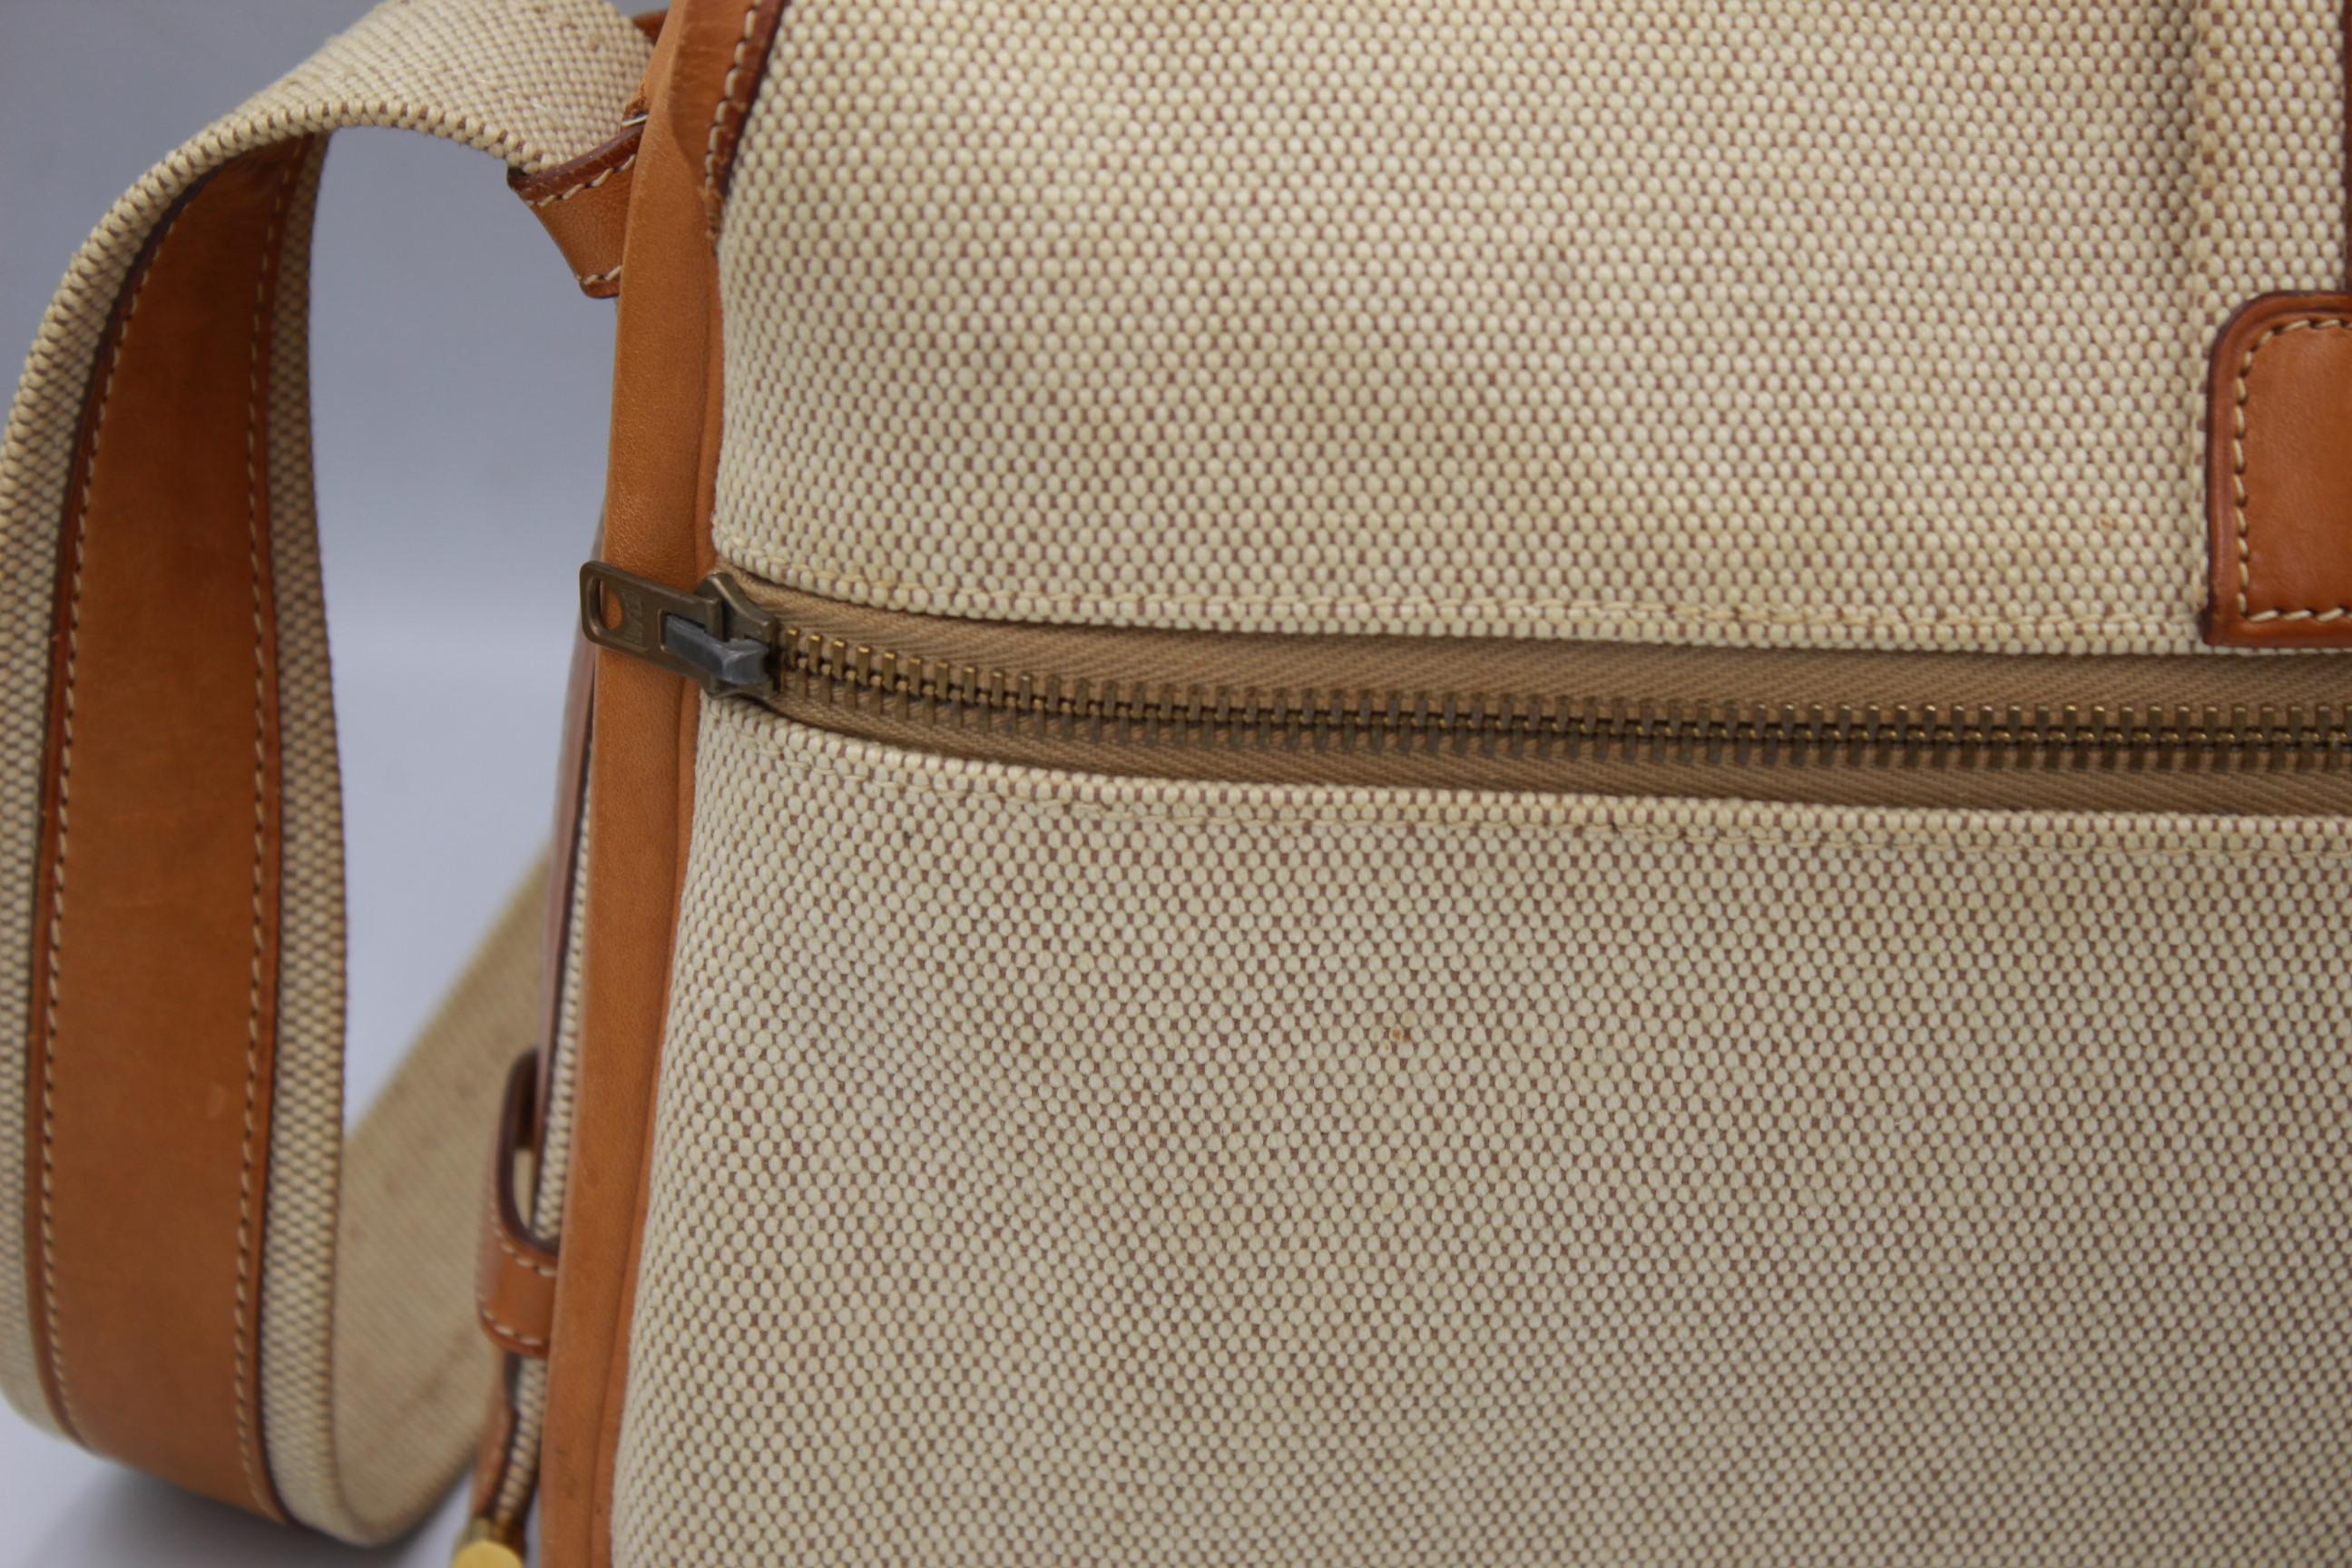 Vintage Hermes Noumea Messeger Bag in Leather and Canvas 2